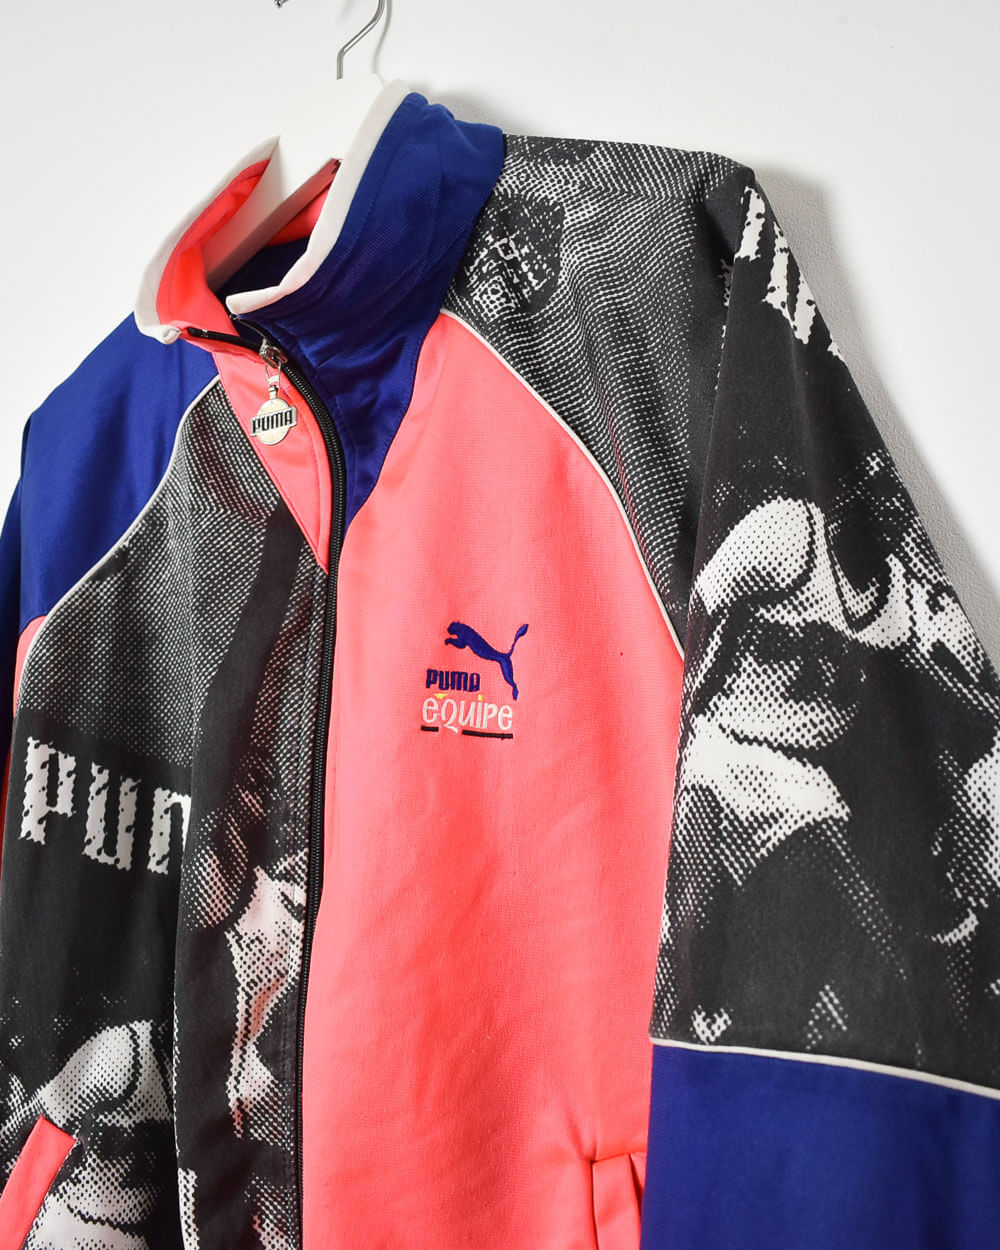 Puma Equipe Tracksuit Top - Small - Domno Vintage 90s, 80s, 00s Retro and Vintage Clothing 